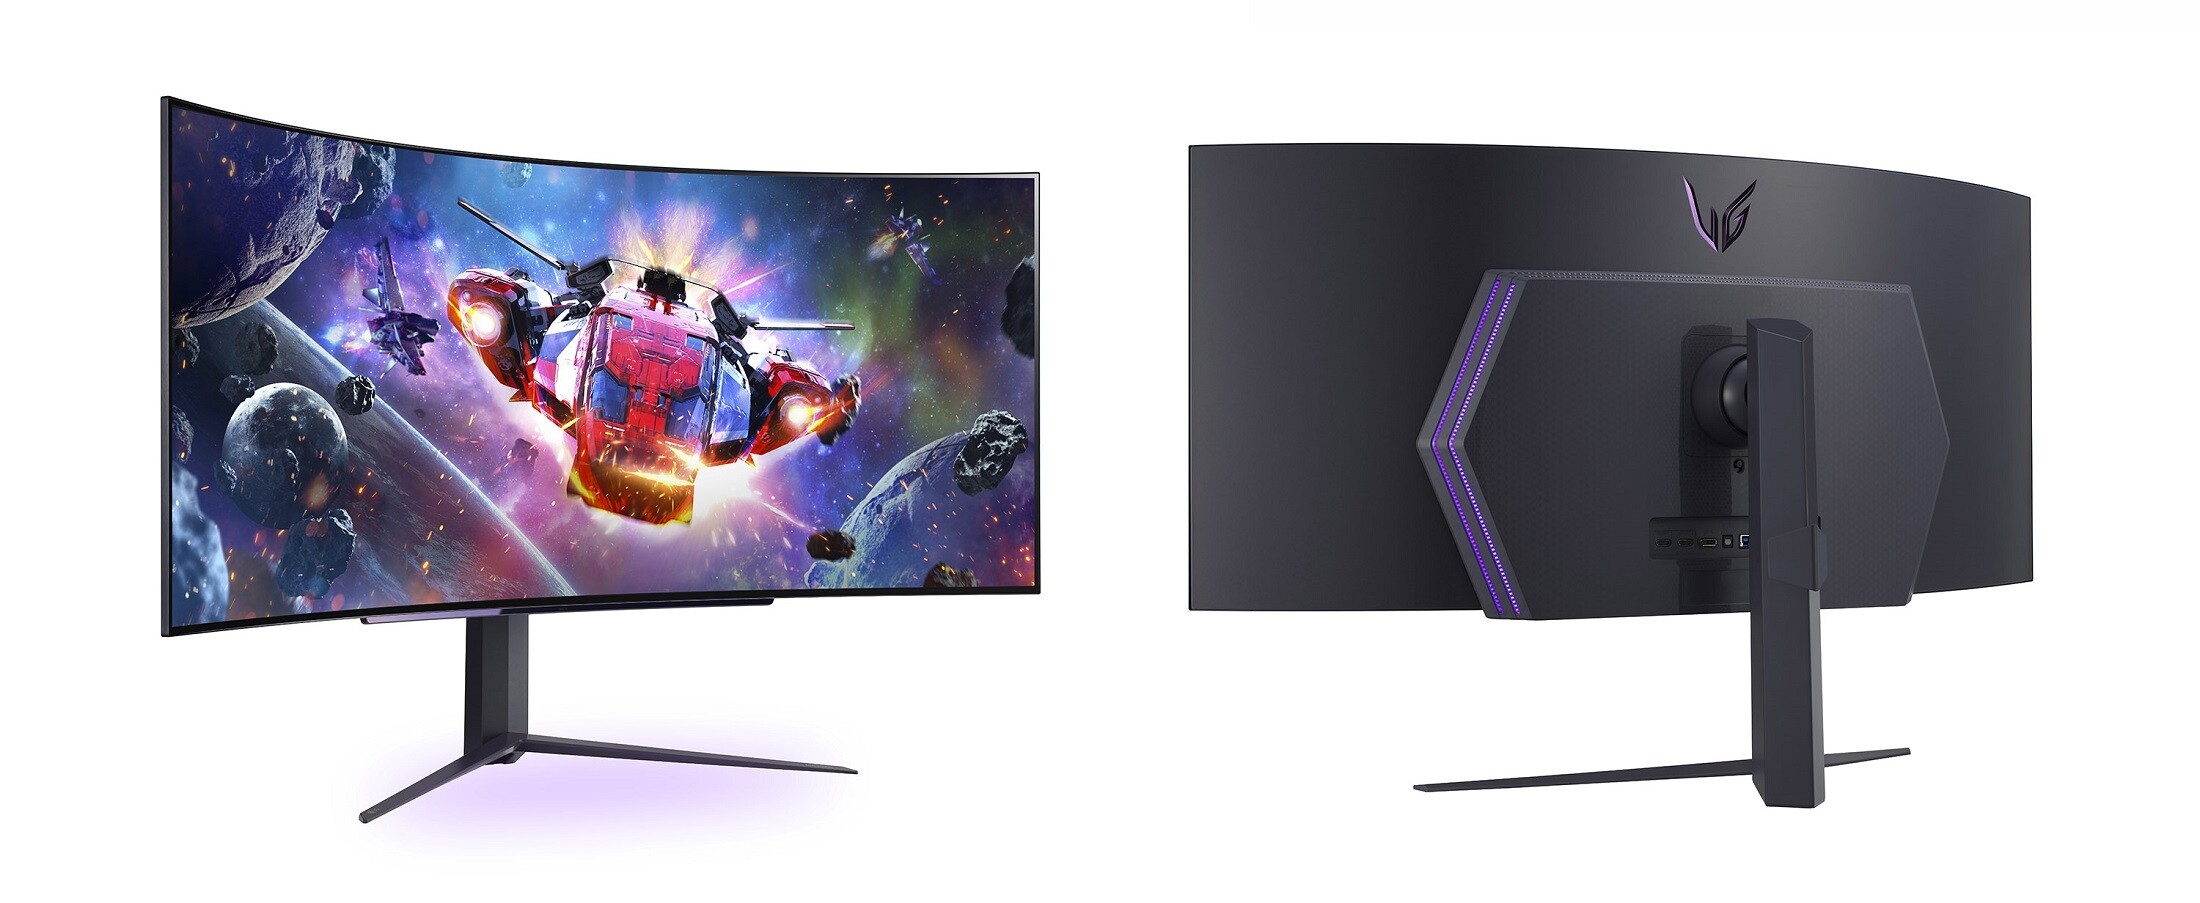 Faster gaming monitors are coming, including 4K at 240Hz and 1080p at 480Hz